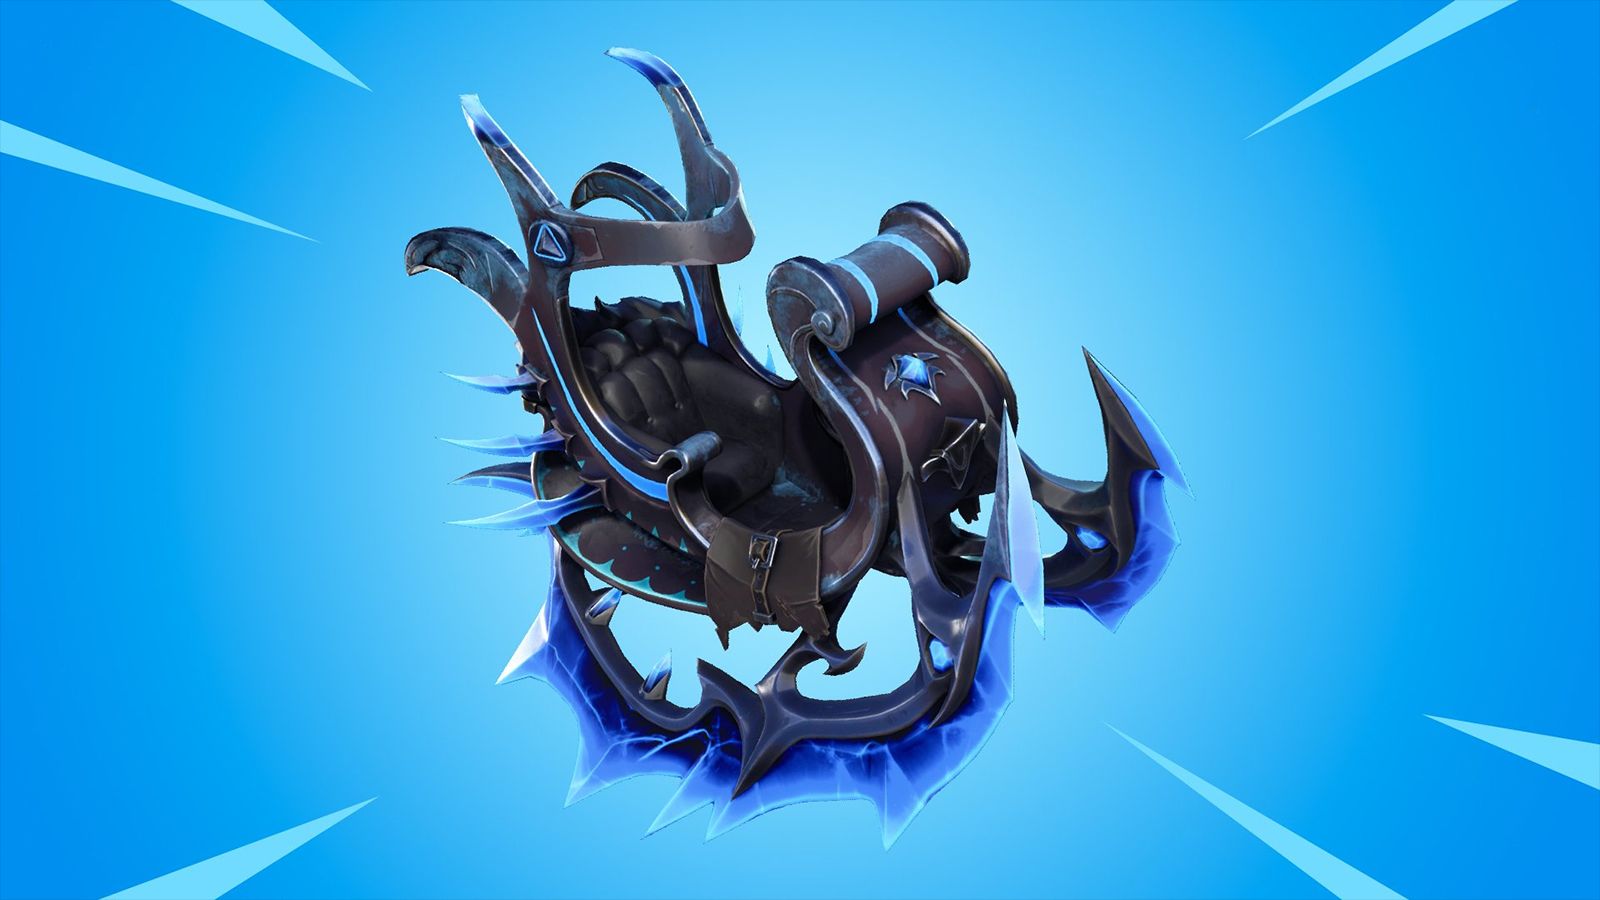 Fortnite Ice Storm Challenges and Rewards